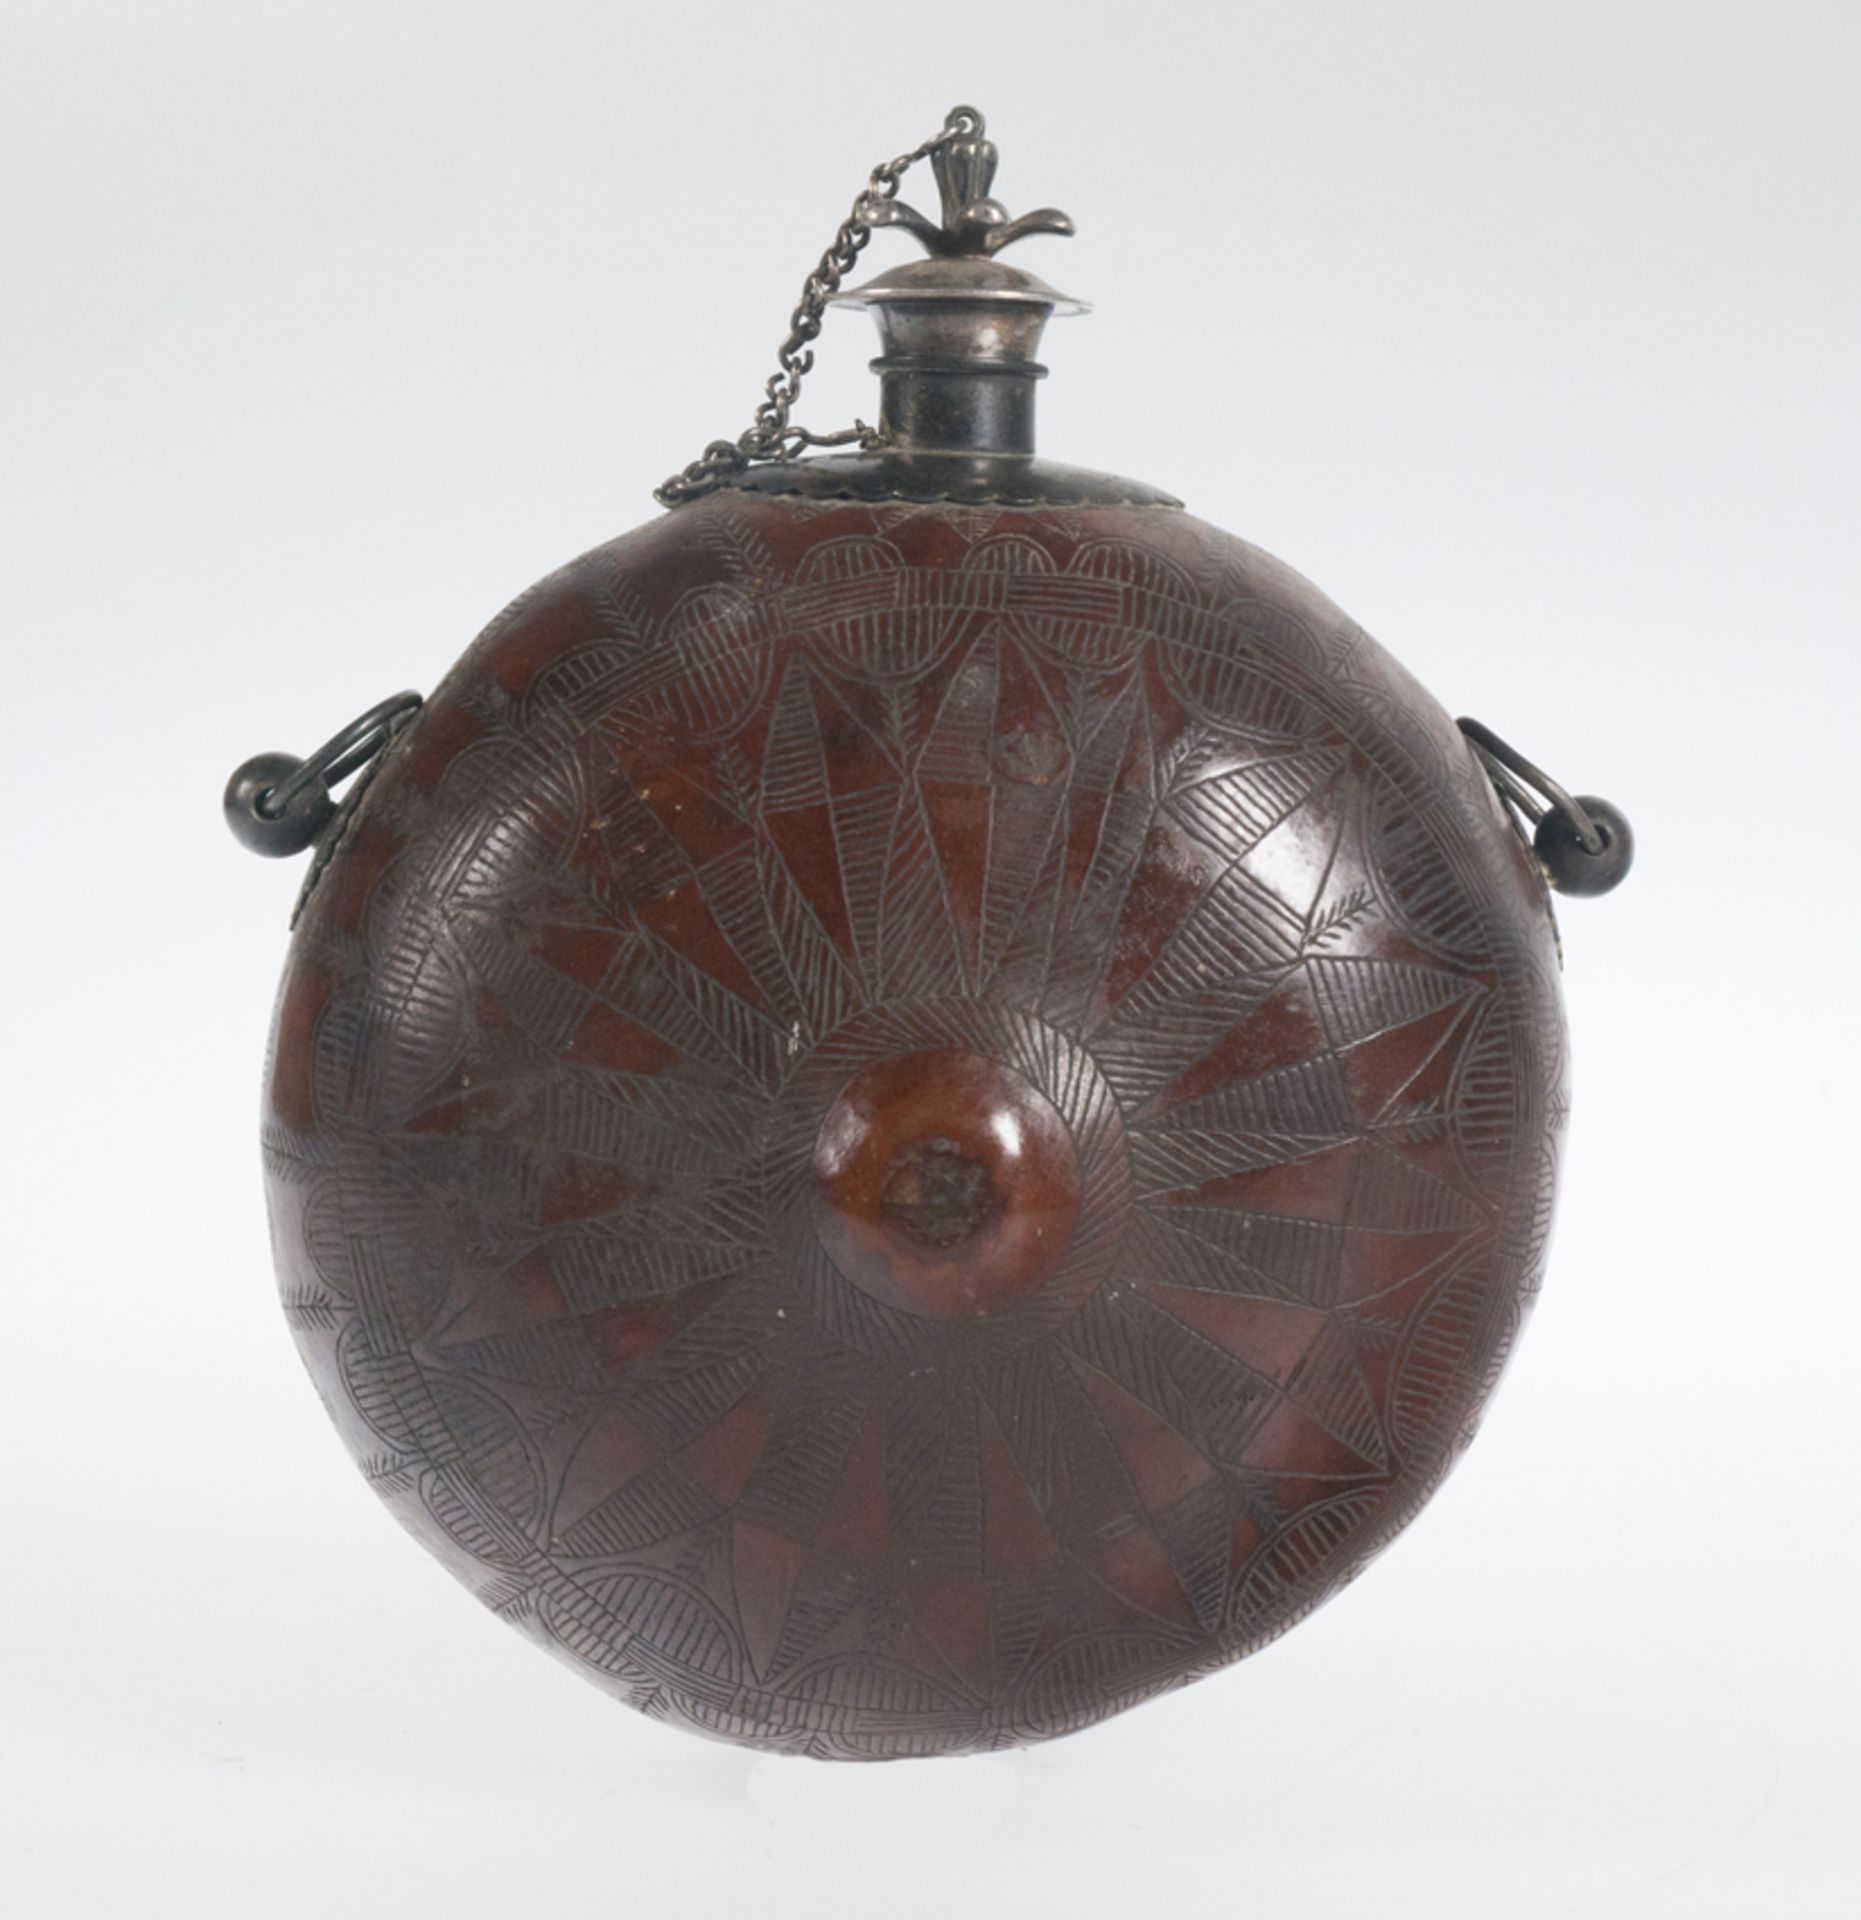 Canteen. Engraved gourd with silver applications. Colonial work. Mexico or Peru. 18th century. - Image 2 of 5